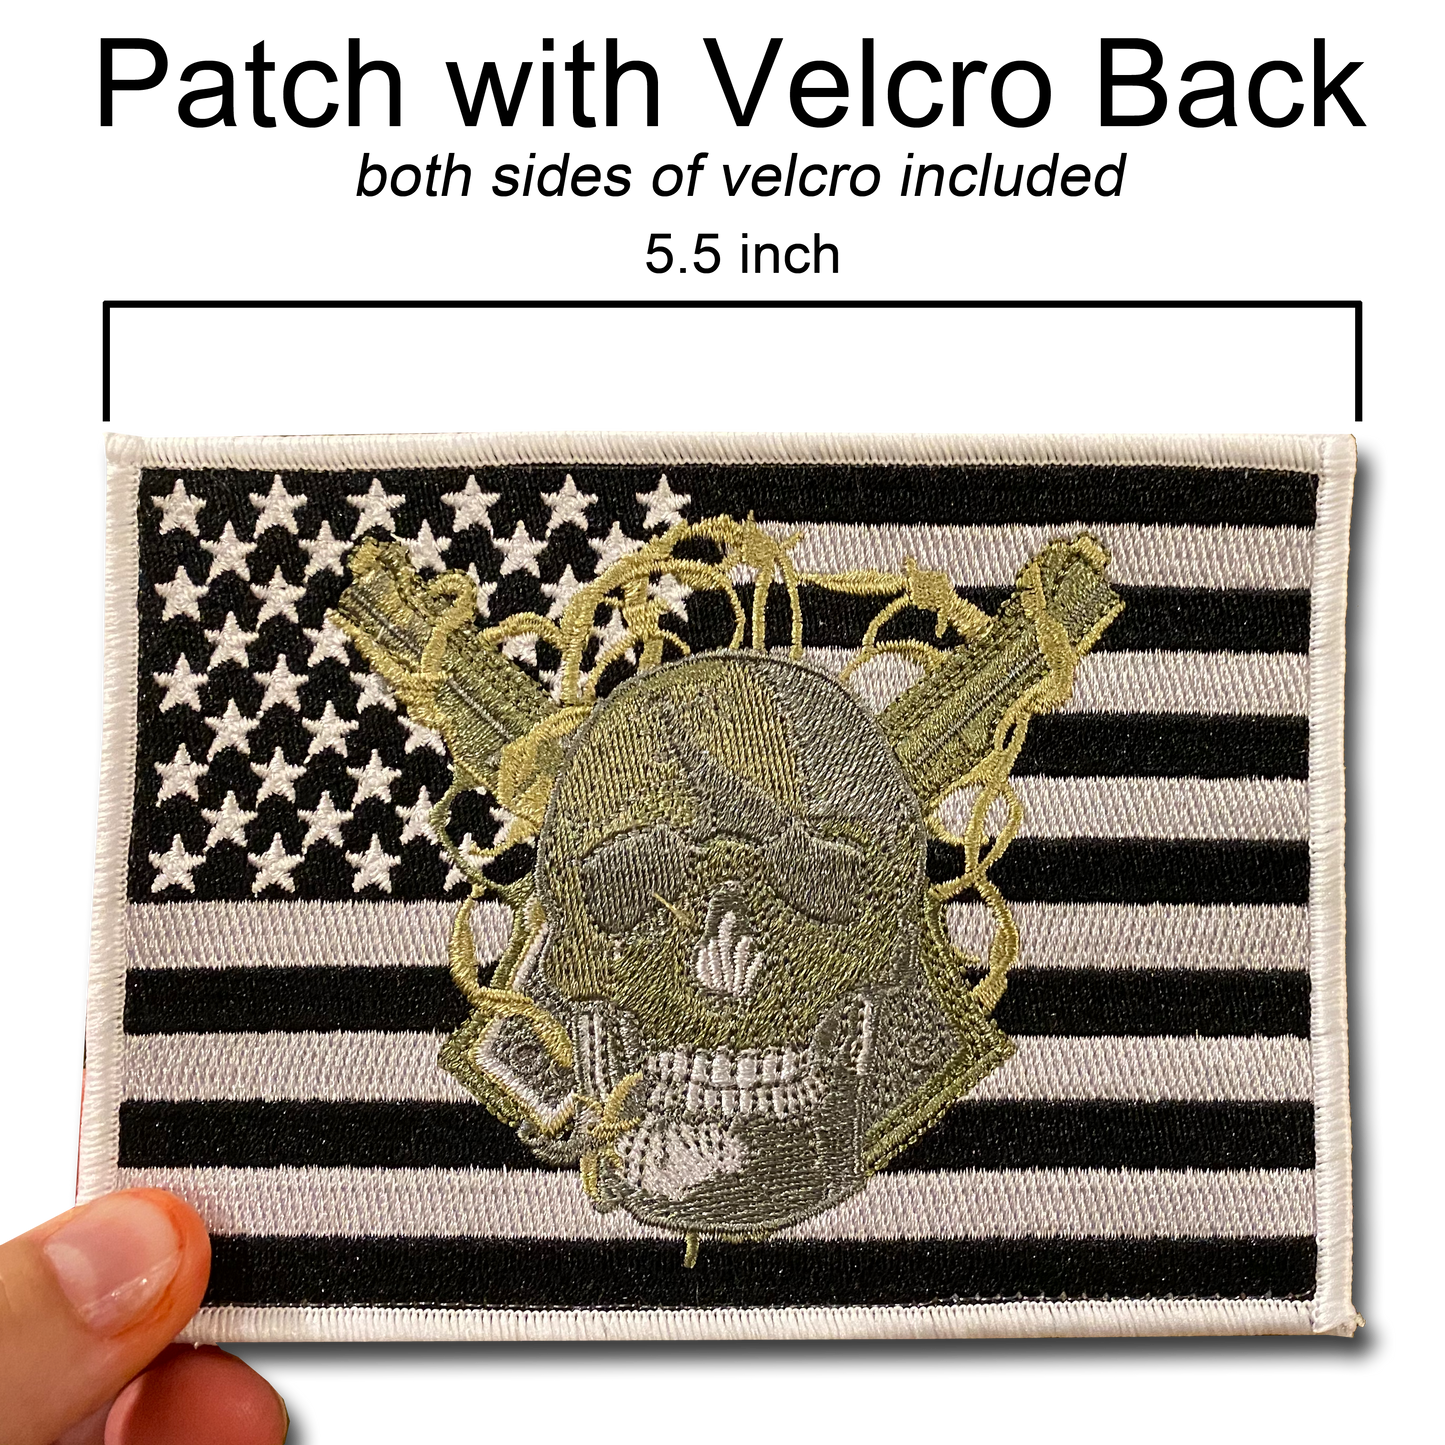 SWAT SRT BORTAC Tactical Police Military Patch American Flag (hook and loop back)